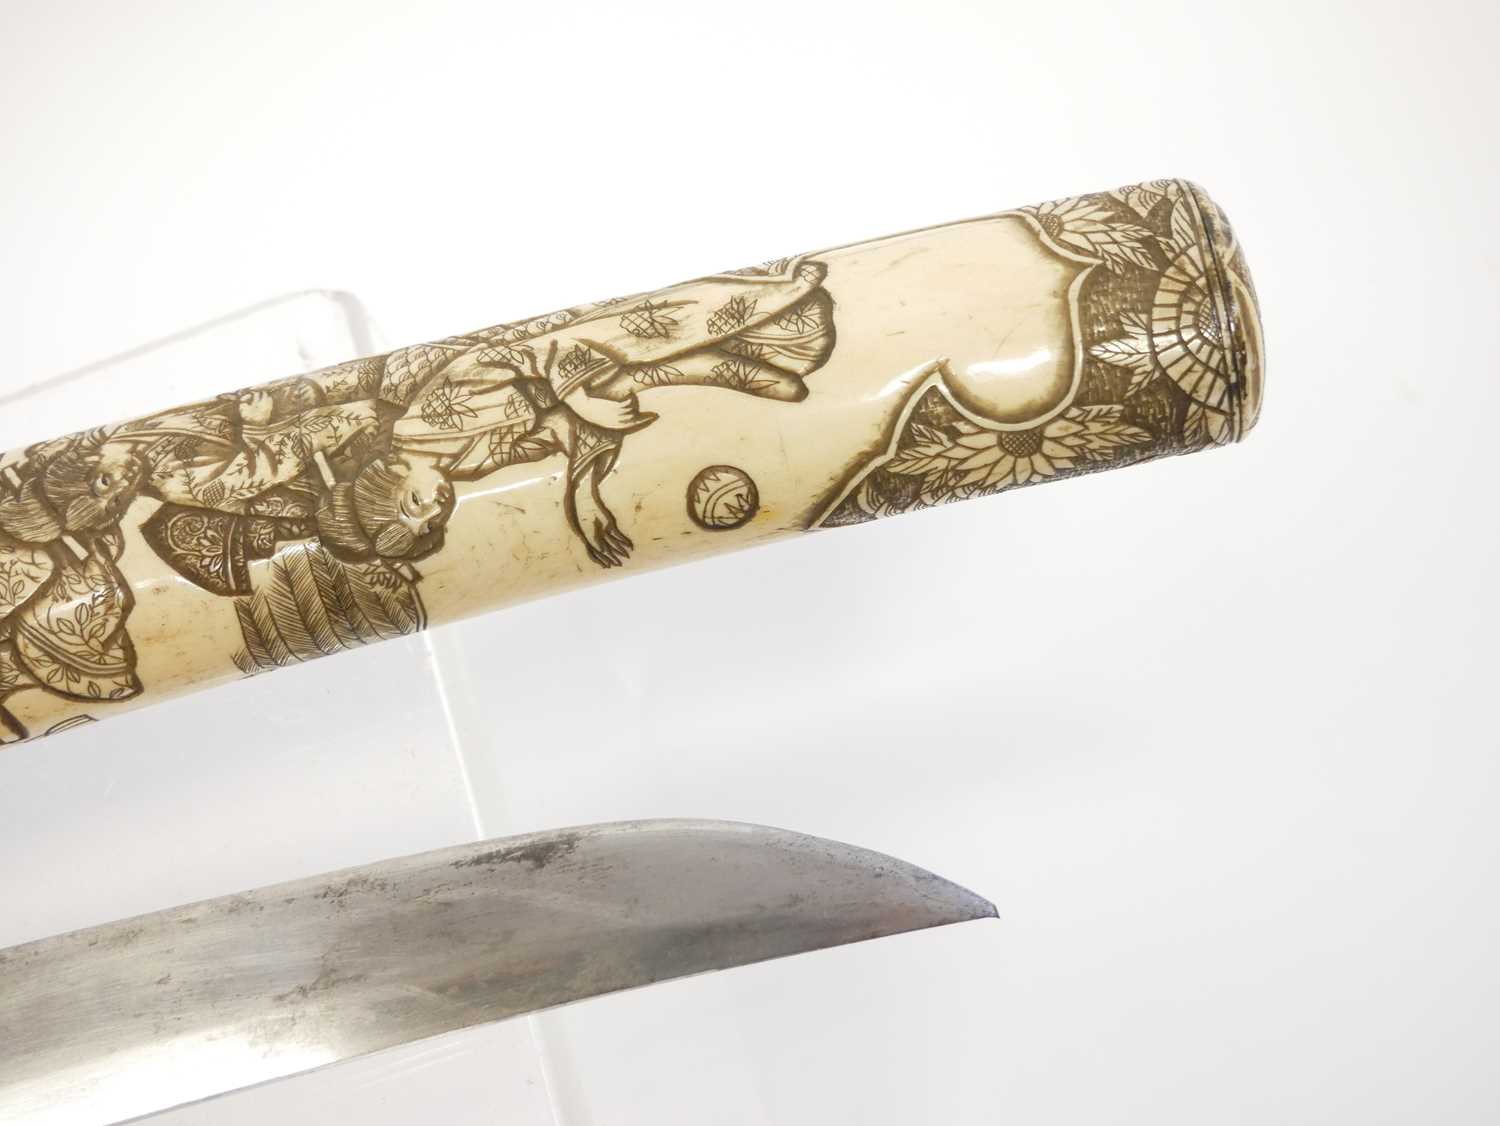 Japanese bone mounted tanto dagger, slightly curved 11inch cutting edge blade, the mounts carved and - Image 11 of 14